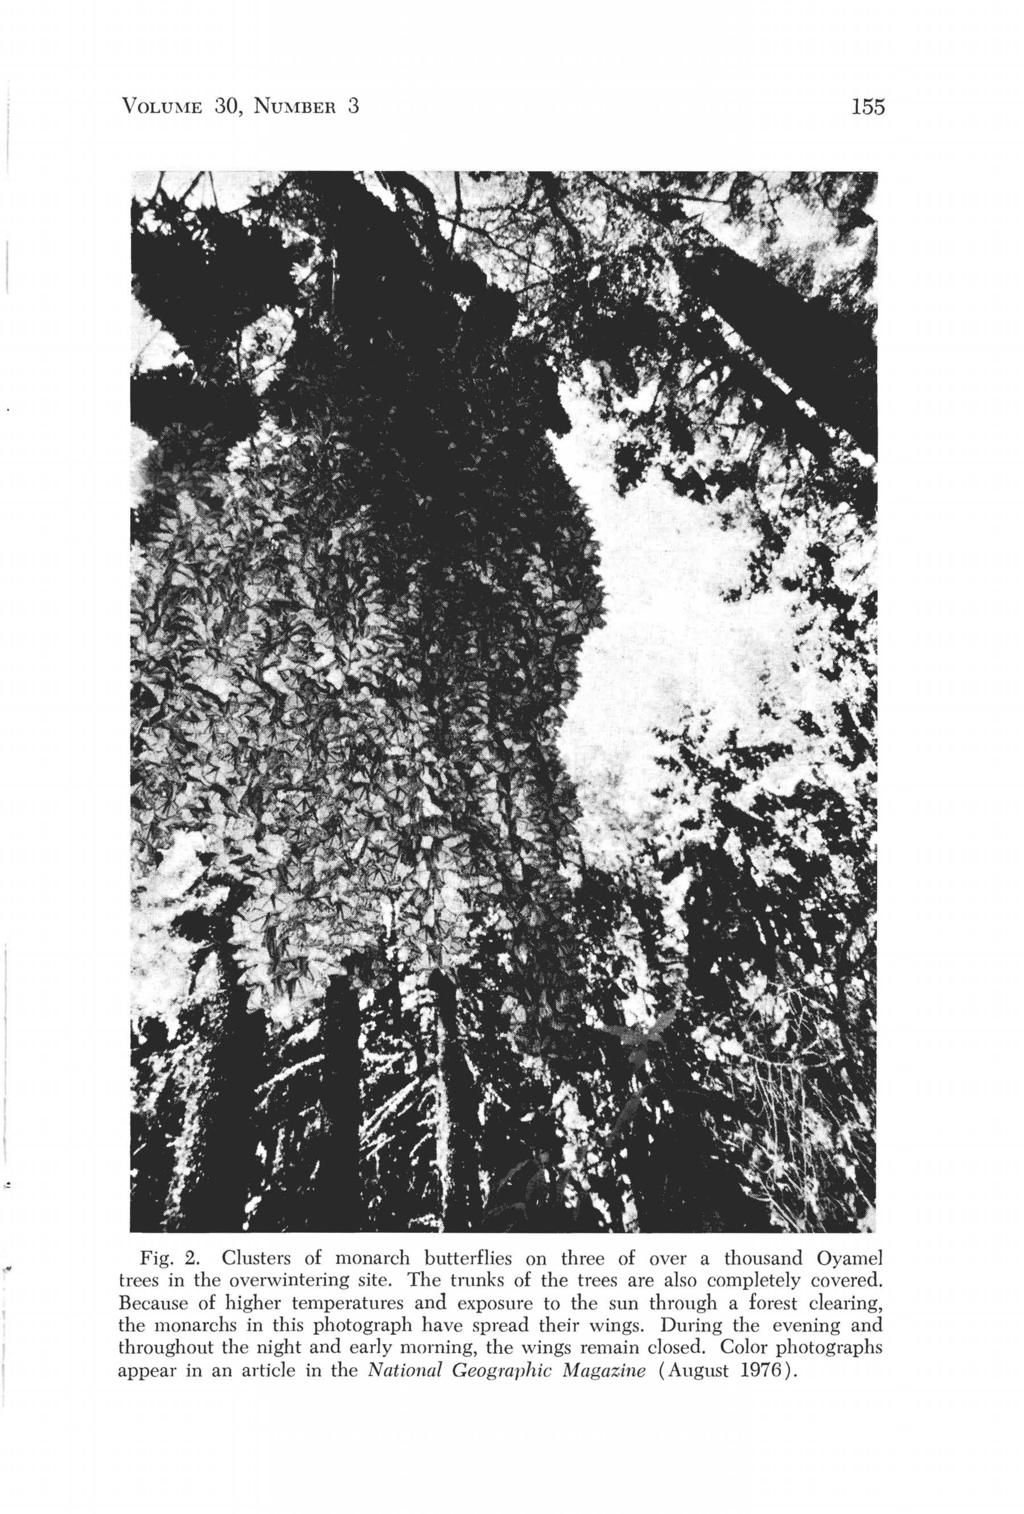 VOLUME 30, NUMBER 3 155 Fig. 2. Clusters of monarch butterflies on three of over a thousand Oyamel trees in the overwintering site. The trunks of the trees are also completely covered.